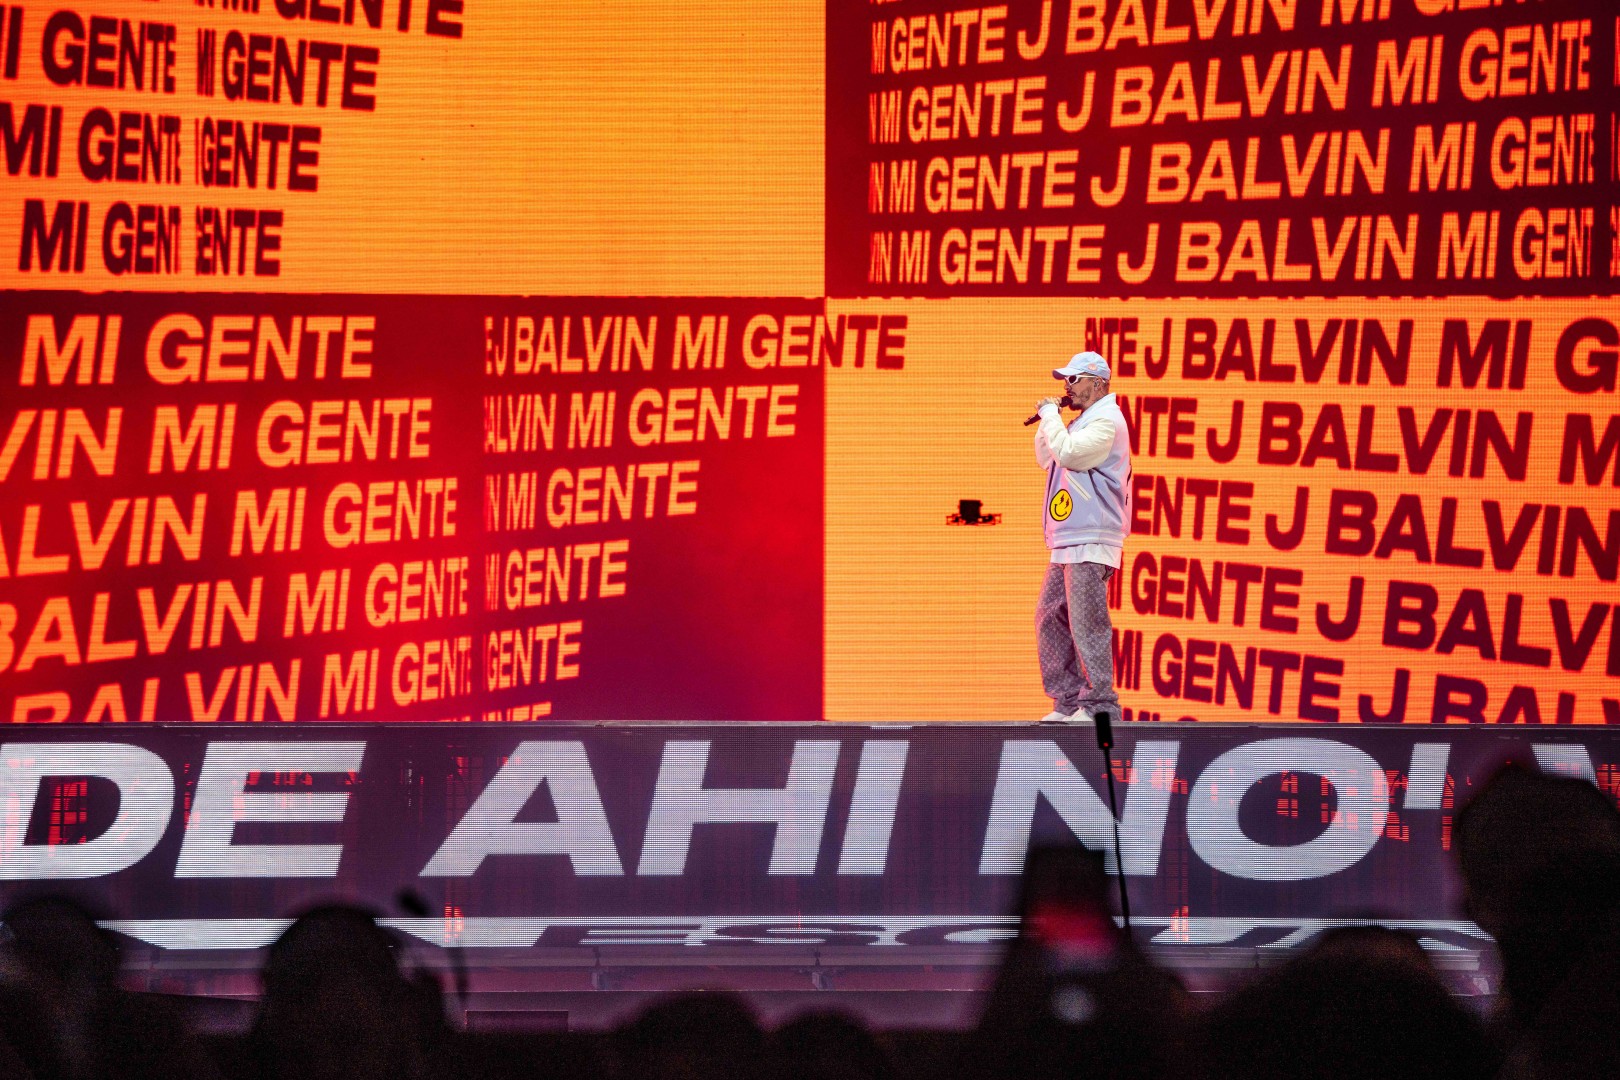 J Balvin at Cluj Arena in Cluj-Napoca on August 7, 2022 (fca2c9952d)